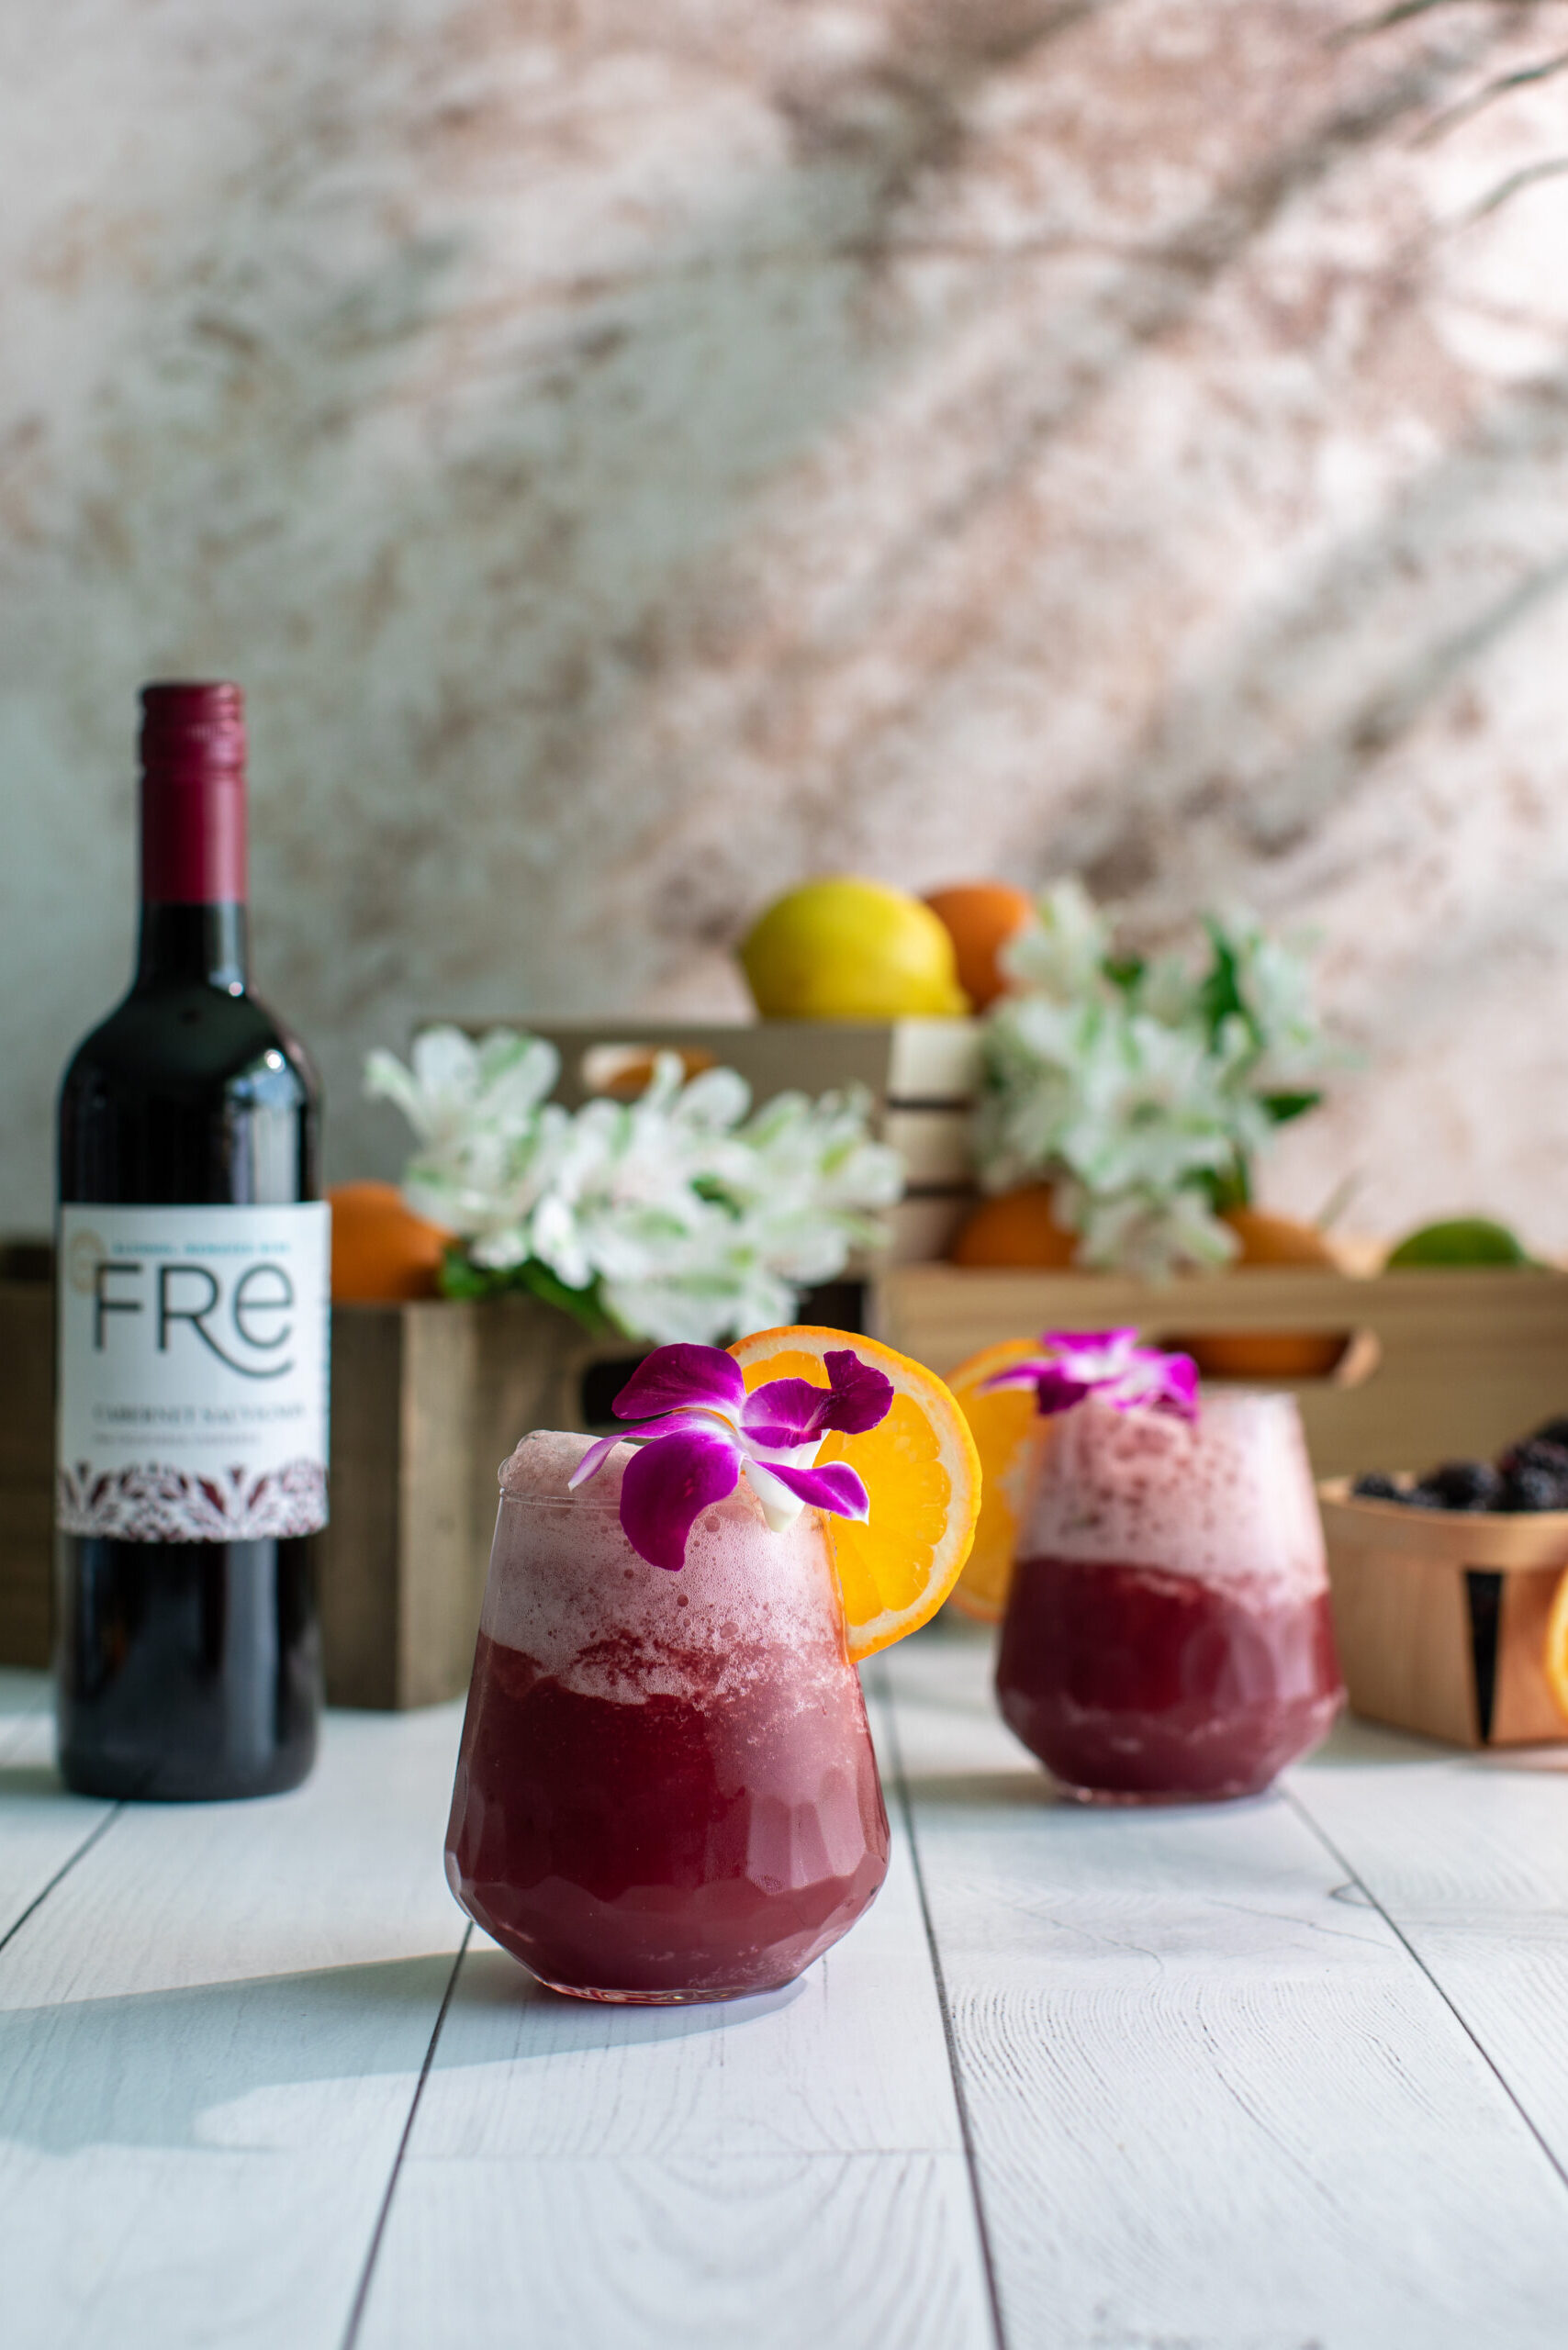 fre wines, fre, free, alcohol removed, sangria, alcohol removed red wine, alcohol free red wine, mocktails, wine cocktails, sangria, alcohol free sangria